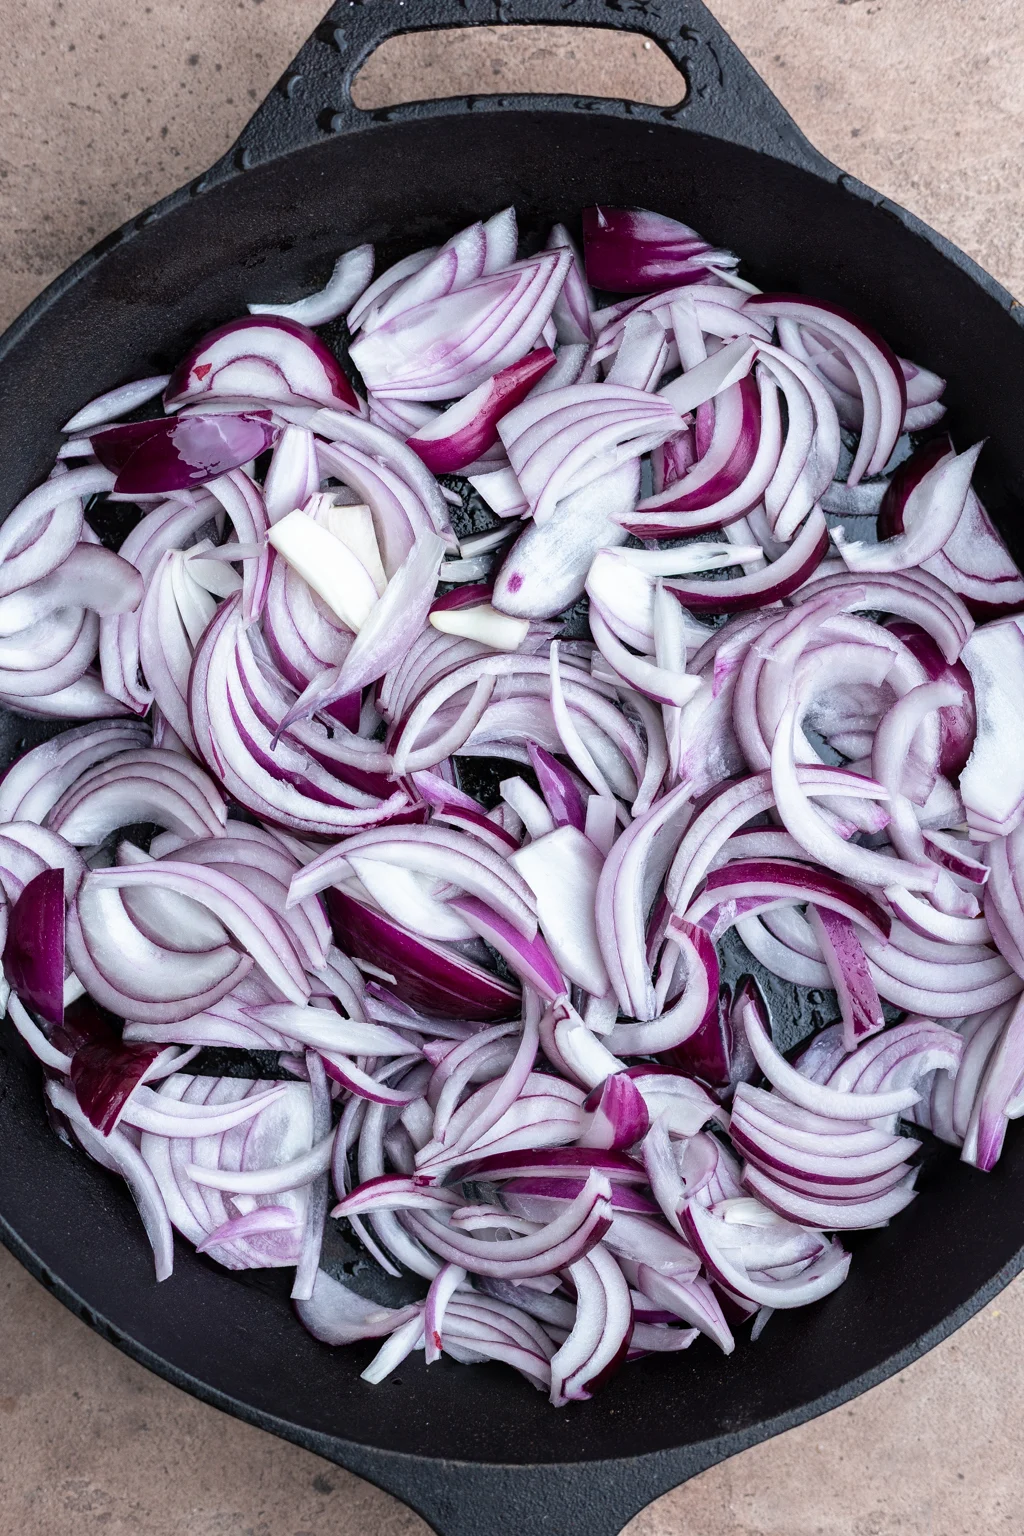 Sliced onions in pan